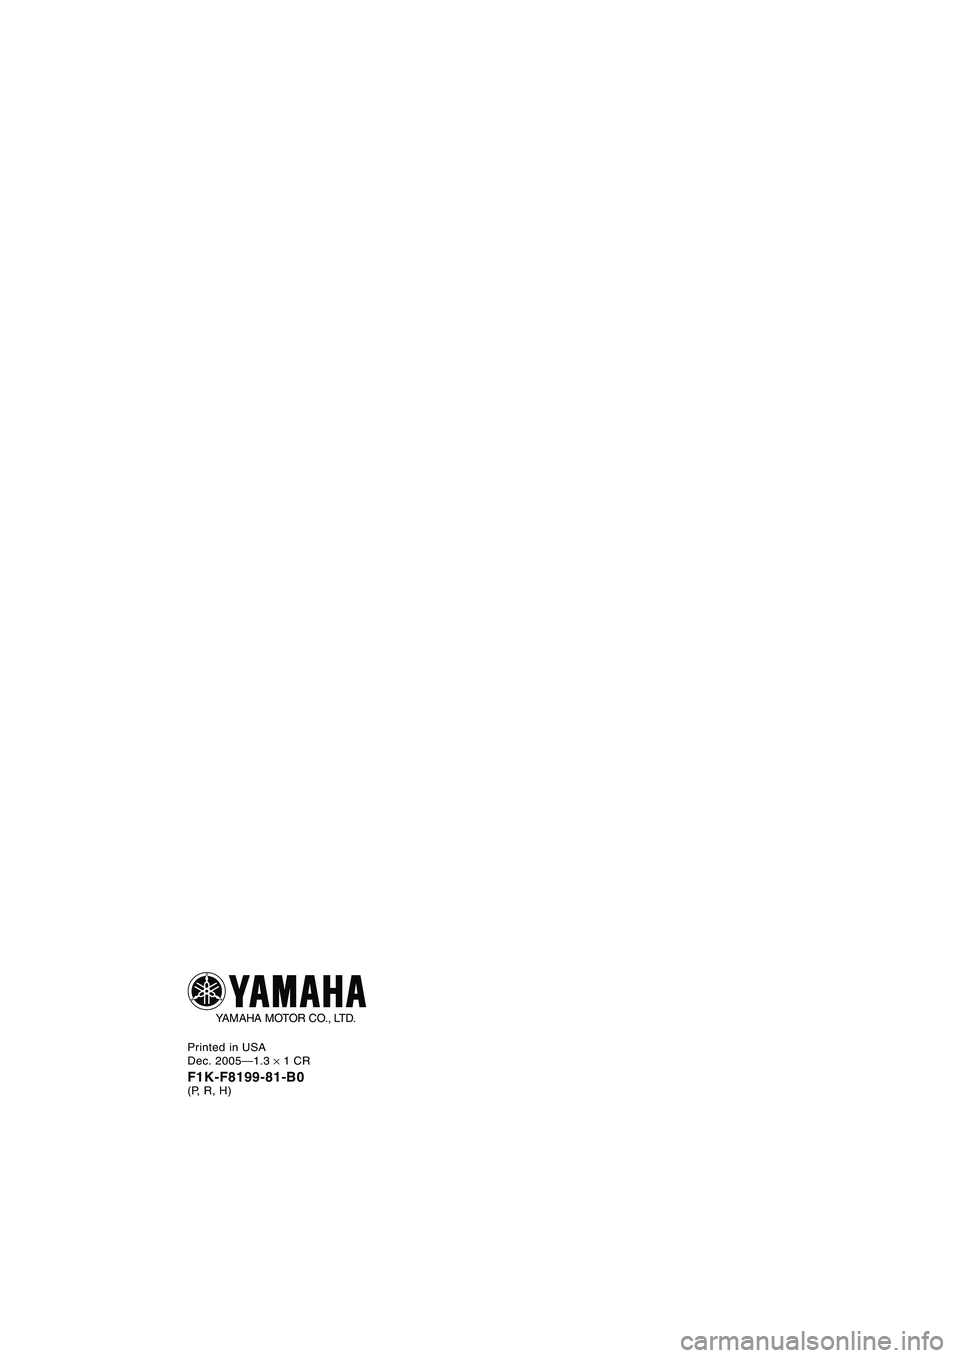 YAMAHA VX SPORT 2006  Manuale duso (in Italian) Printed in USA
Dec. 2005—1.3 × 1 CR
F1K-F8199-81-B0(P, R, H)
YAMAHA MOTOR CO., LTD.
B_F1K80.book  Page 1  Monday, October 24, 2005  2:31 PM 